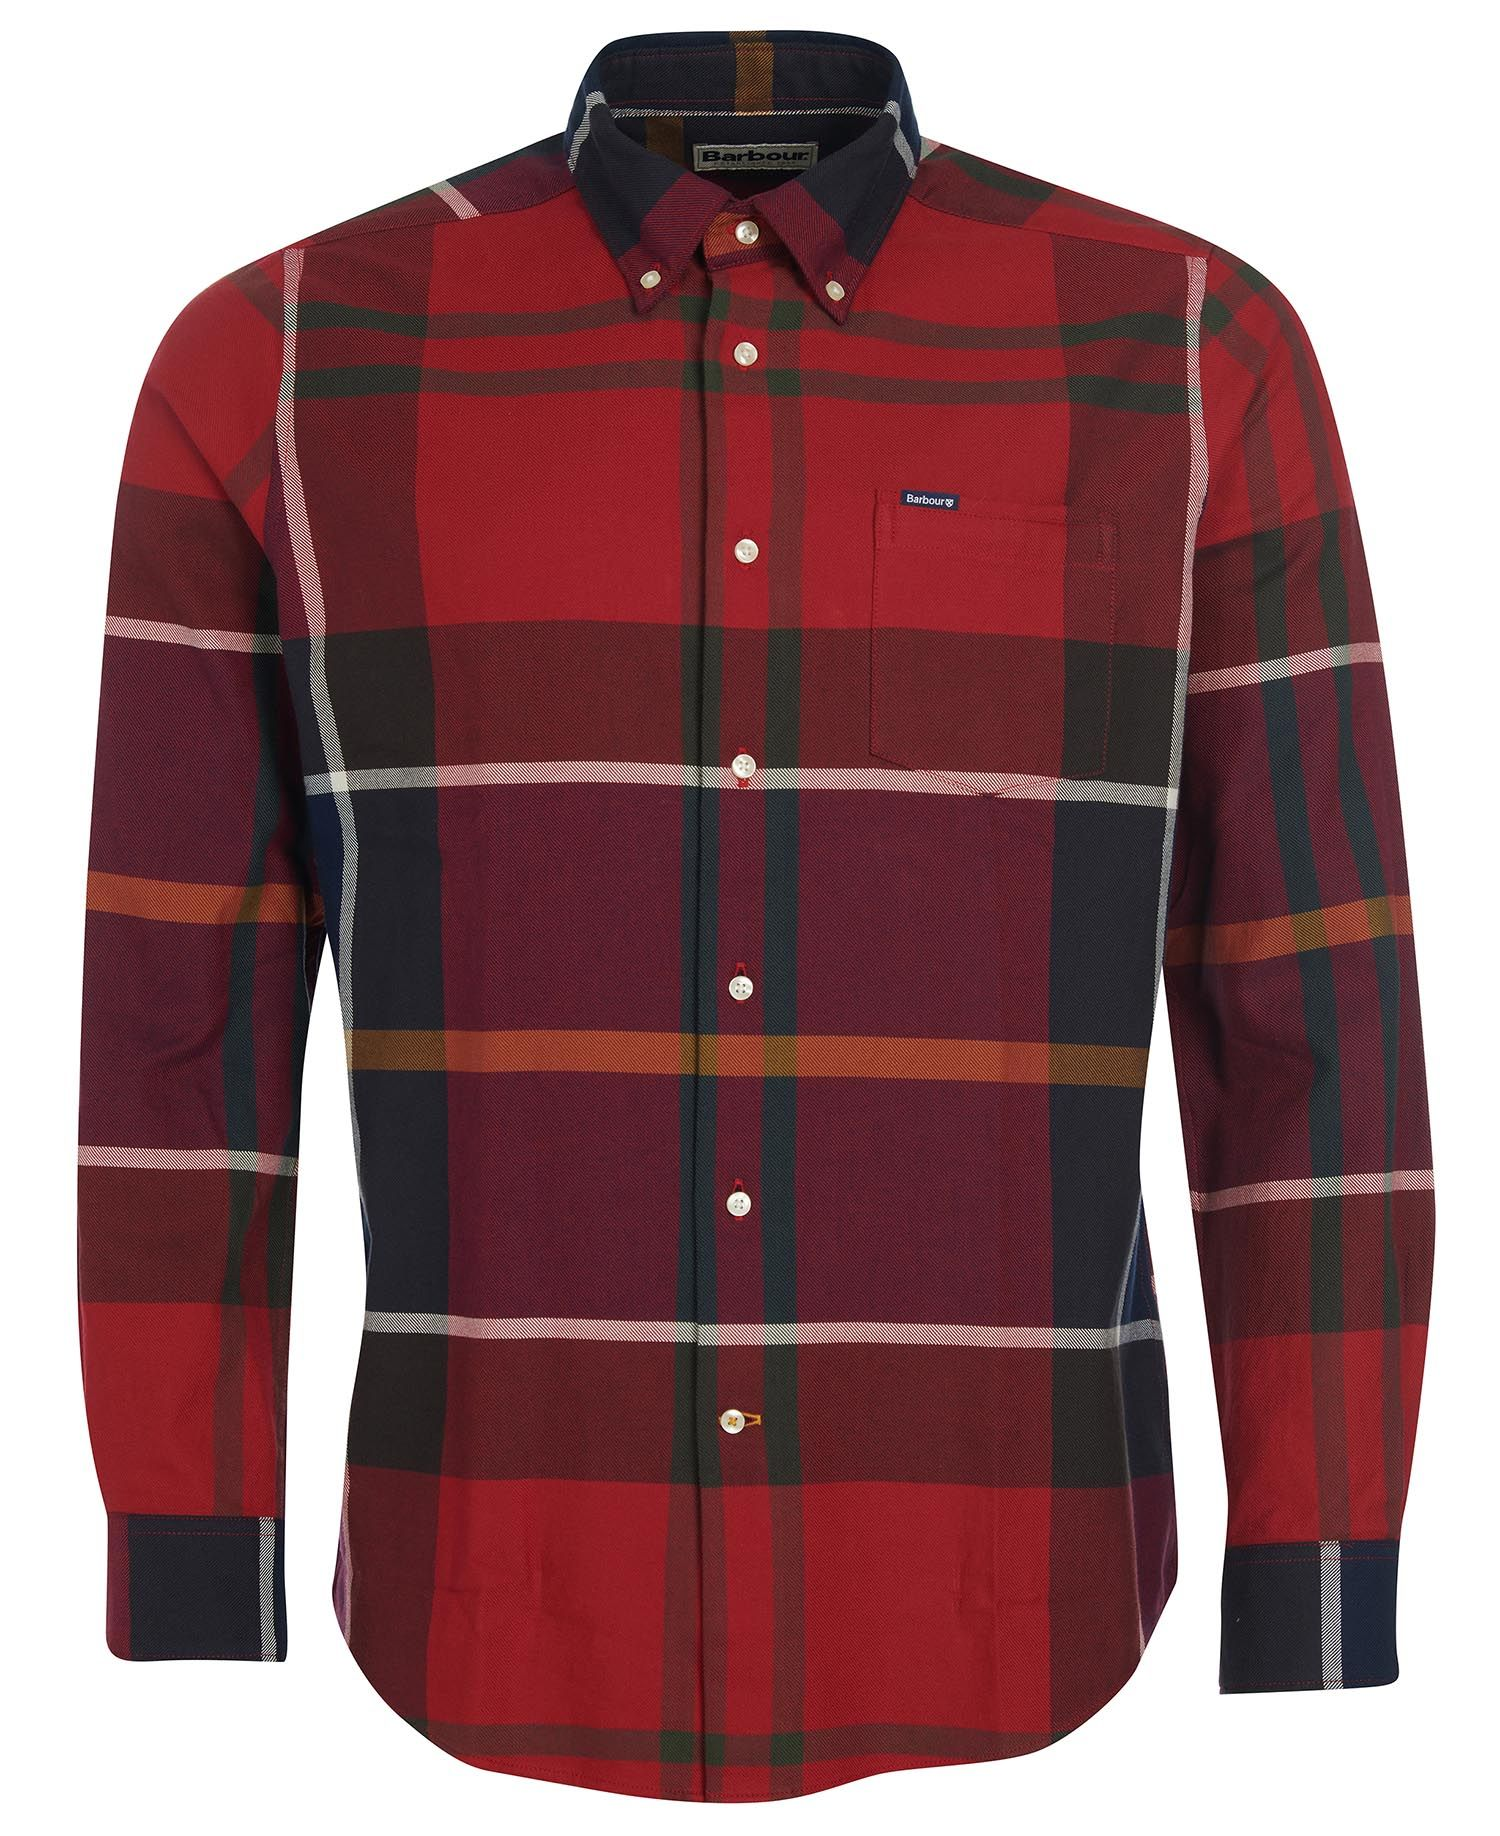 Barbour Dunoon Tailored Shirt Red